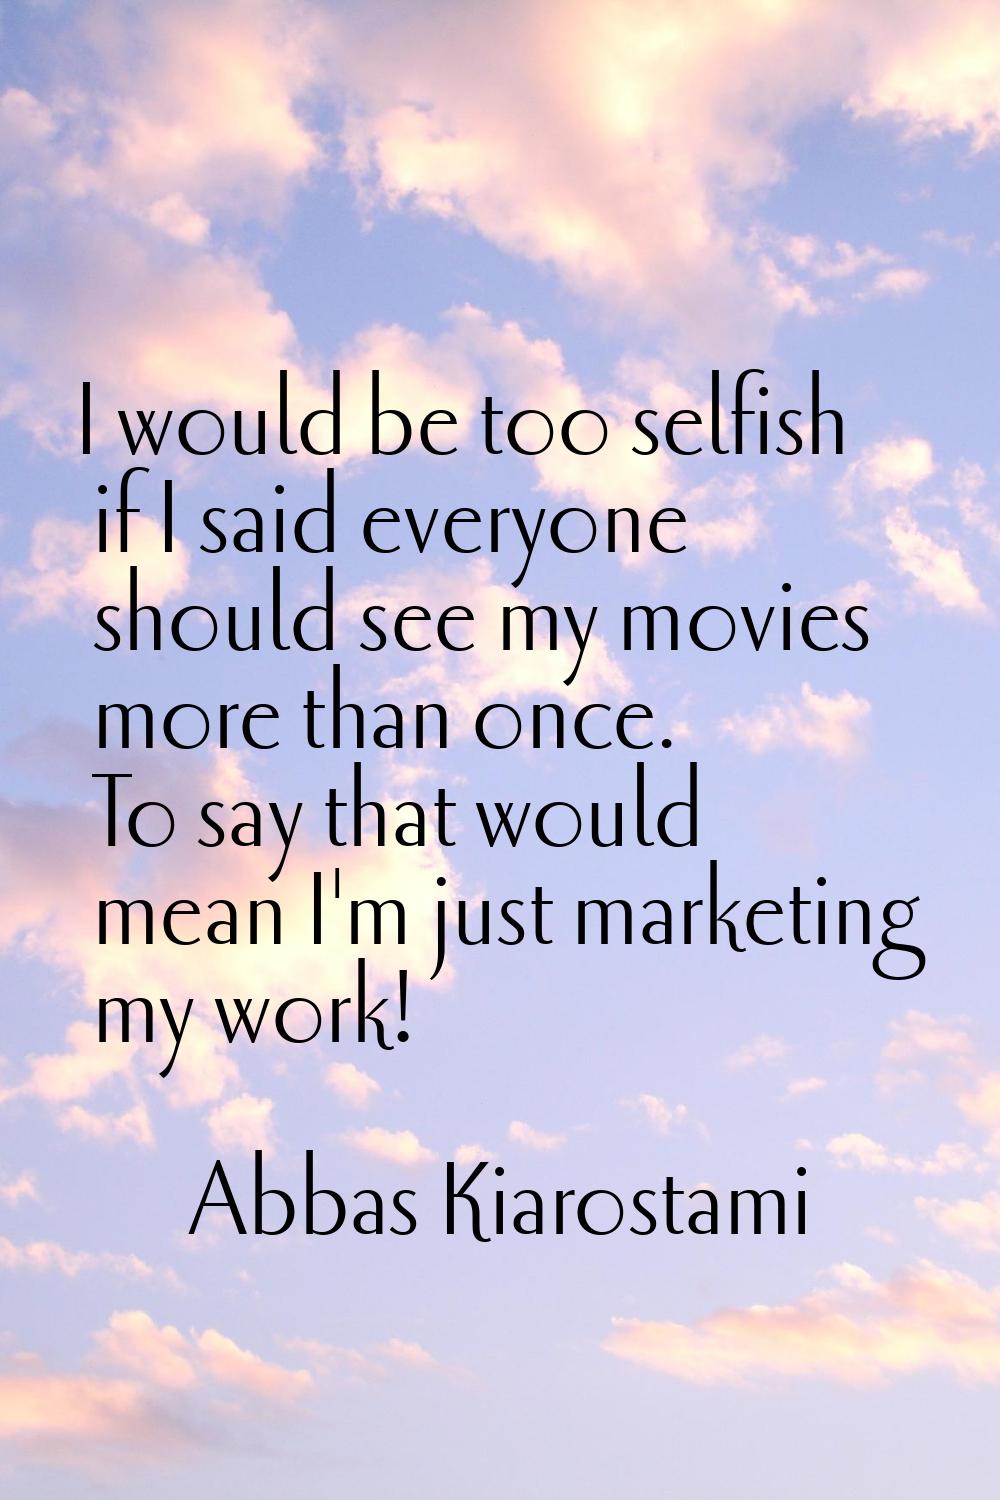 I would be too selfish if I said everyone should see my movies more than once. To say that would me